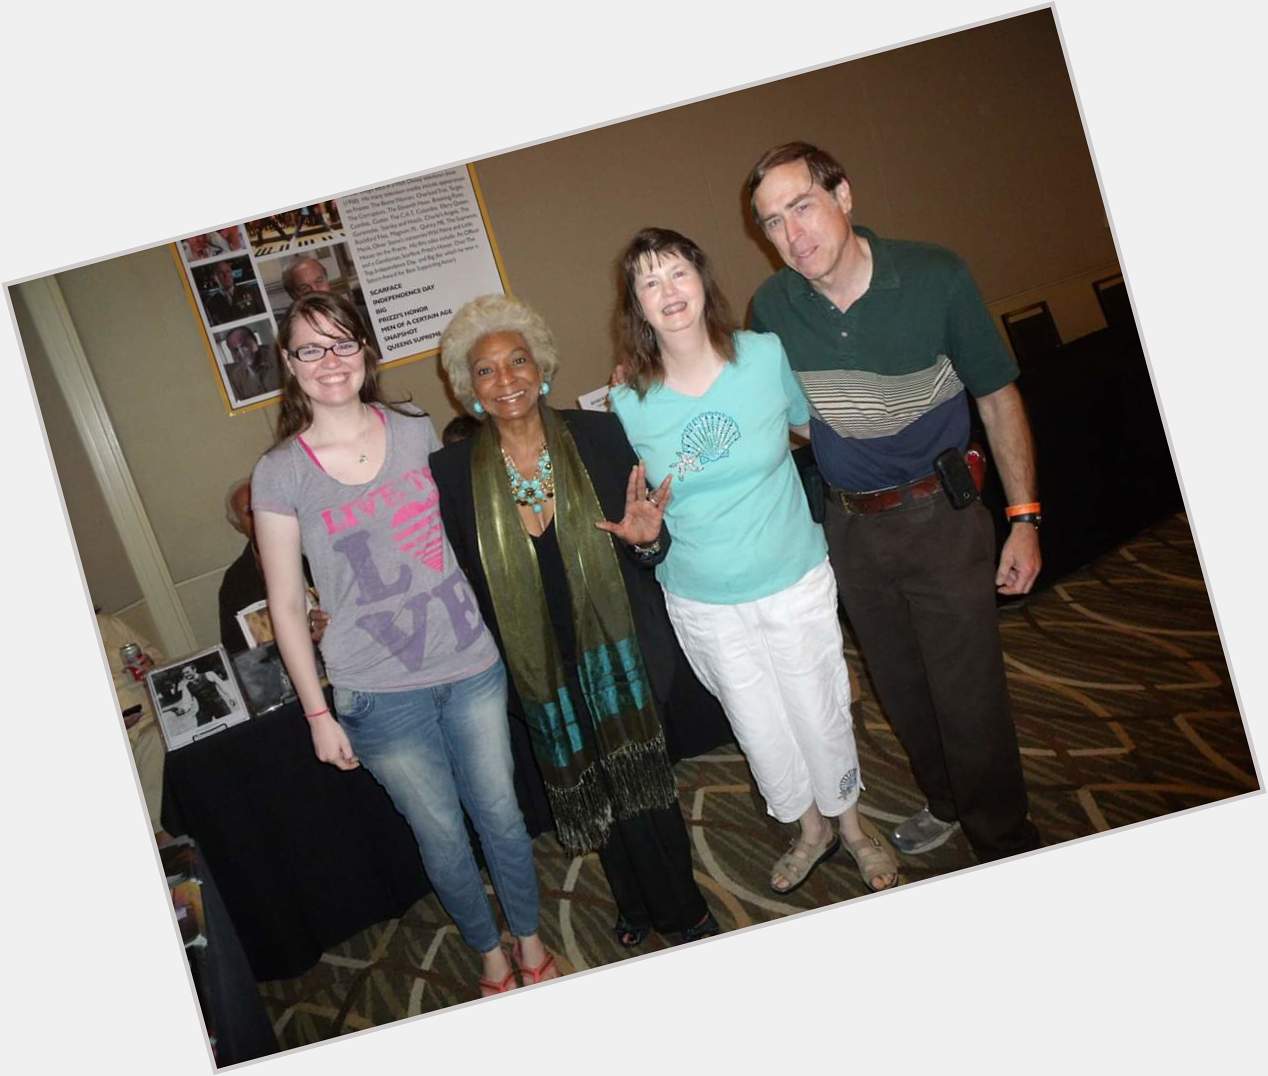   Happy Birthday Nichelle Nichols! This is me and my parents meeting her in 2013. 